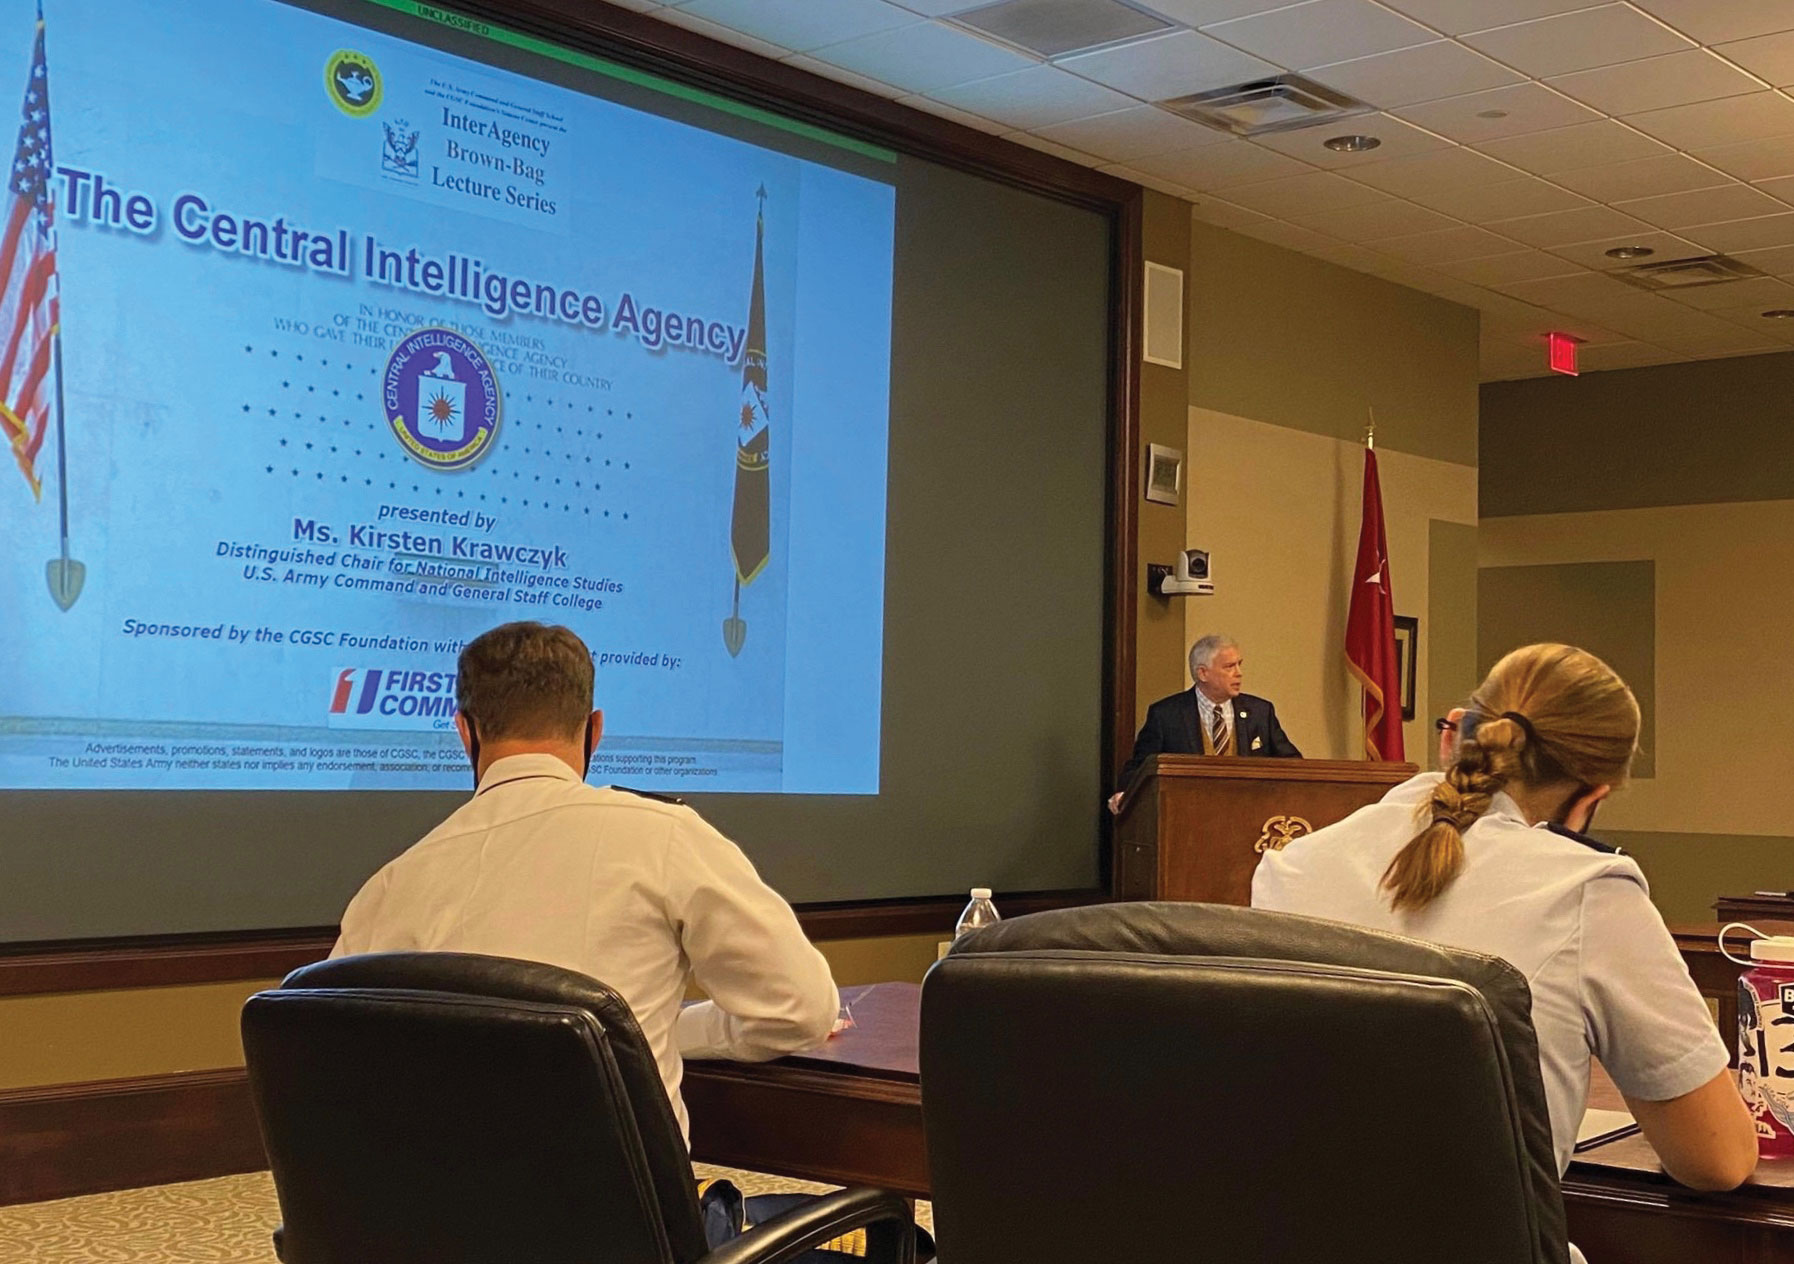 CGSC Foundation President/CEO Rod Cox provides welcome remarks and introduces the speaker at the InterAgency Brown-Bag Lecture on Oct. 20, 2021 in the Arnold Conference Room of the Lewis and Clark Center on Fort Leavenworth.